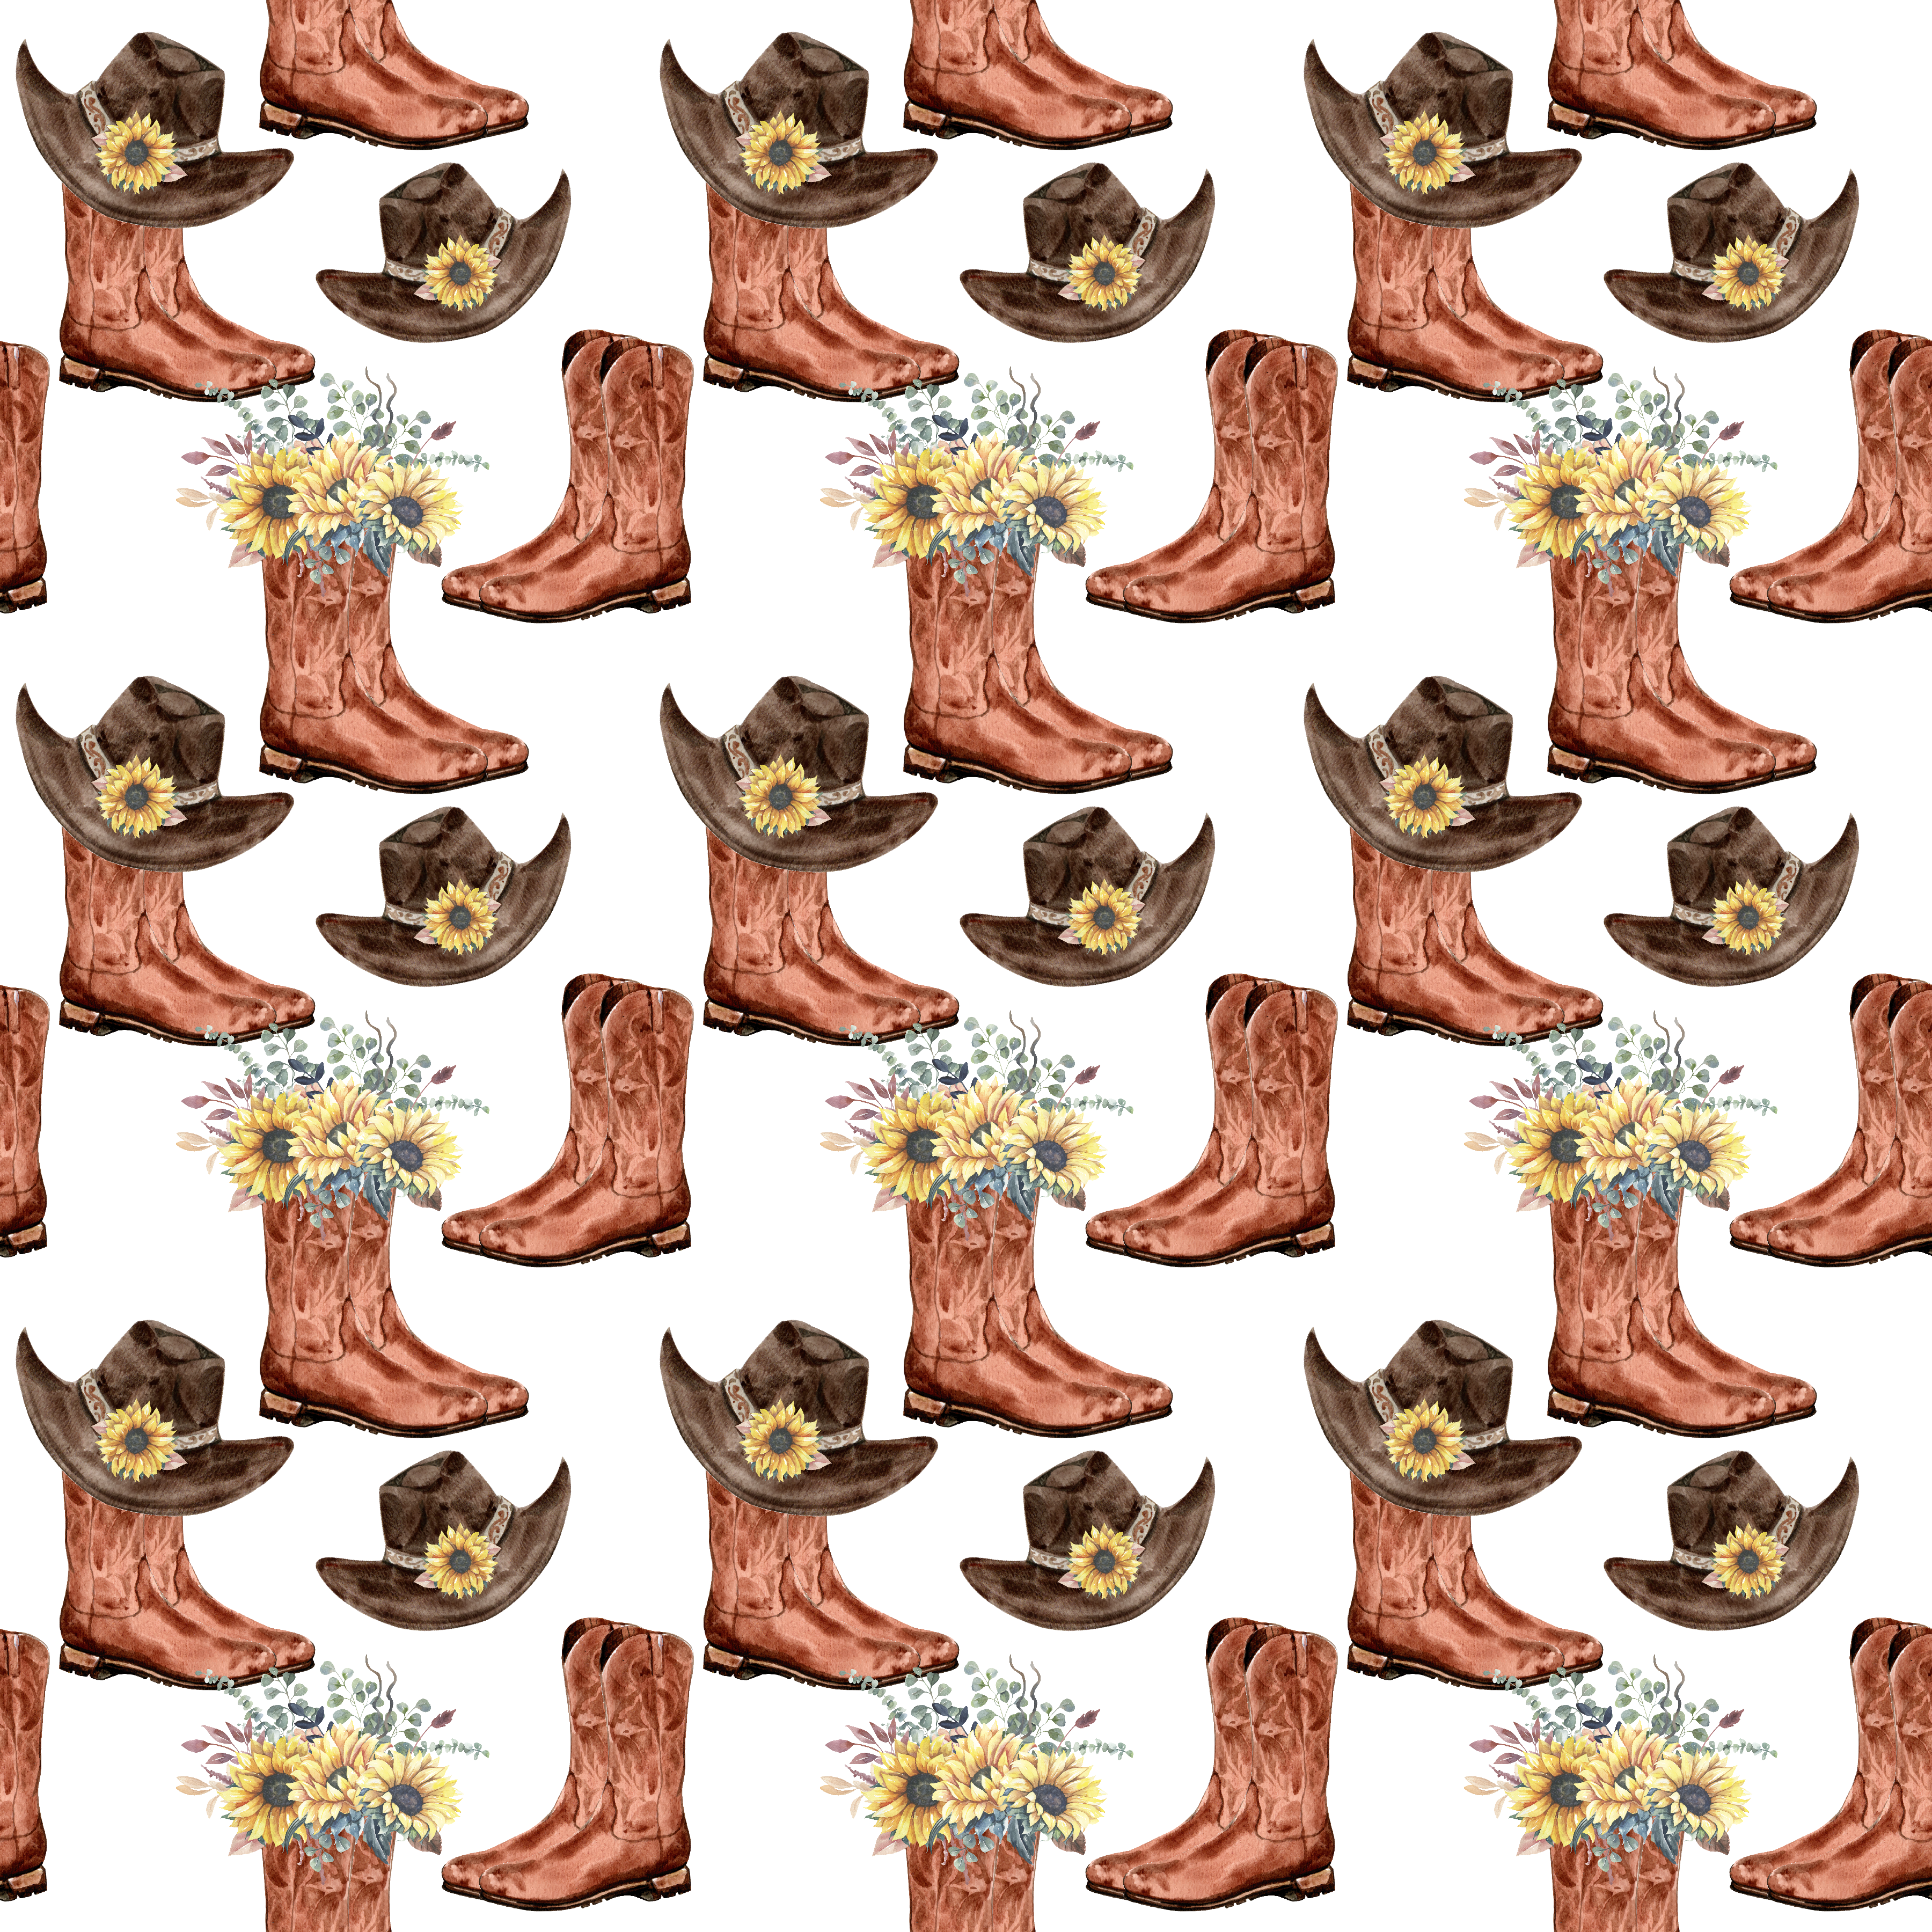 Cowboy Boots and Sunflowers Pattern Vinyl 12" x 12" - The Vinyl Haus